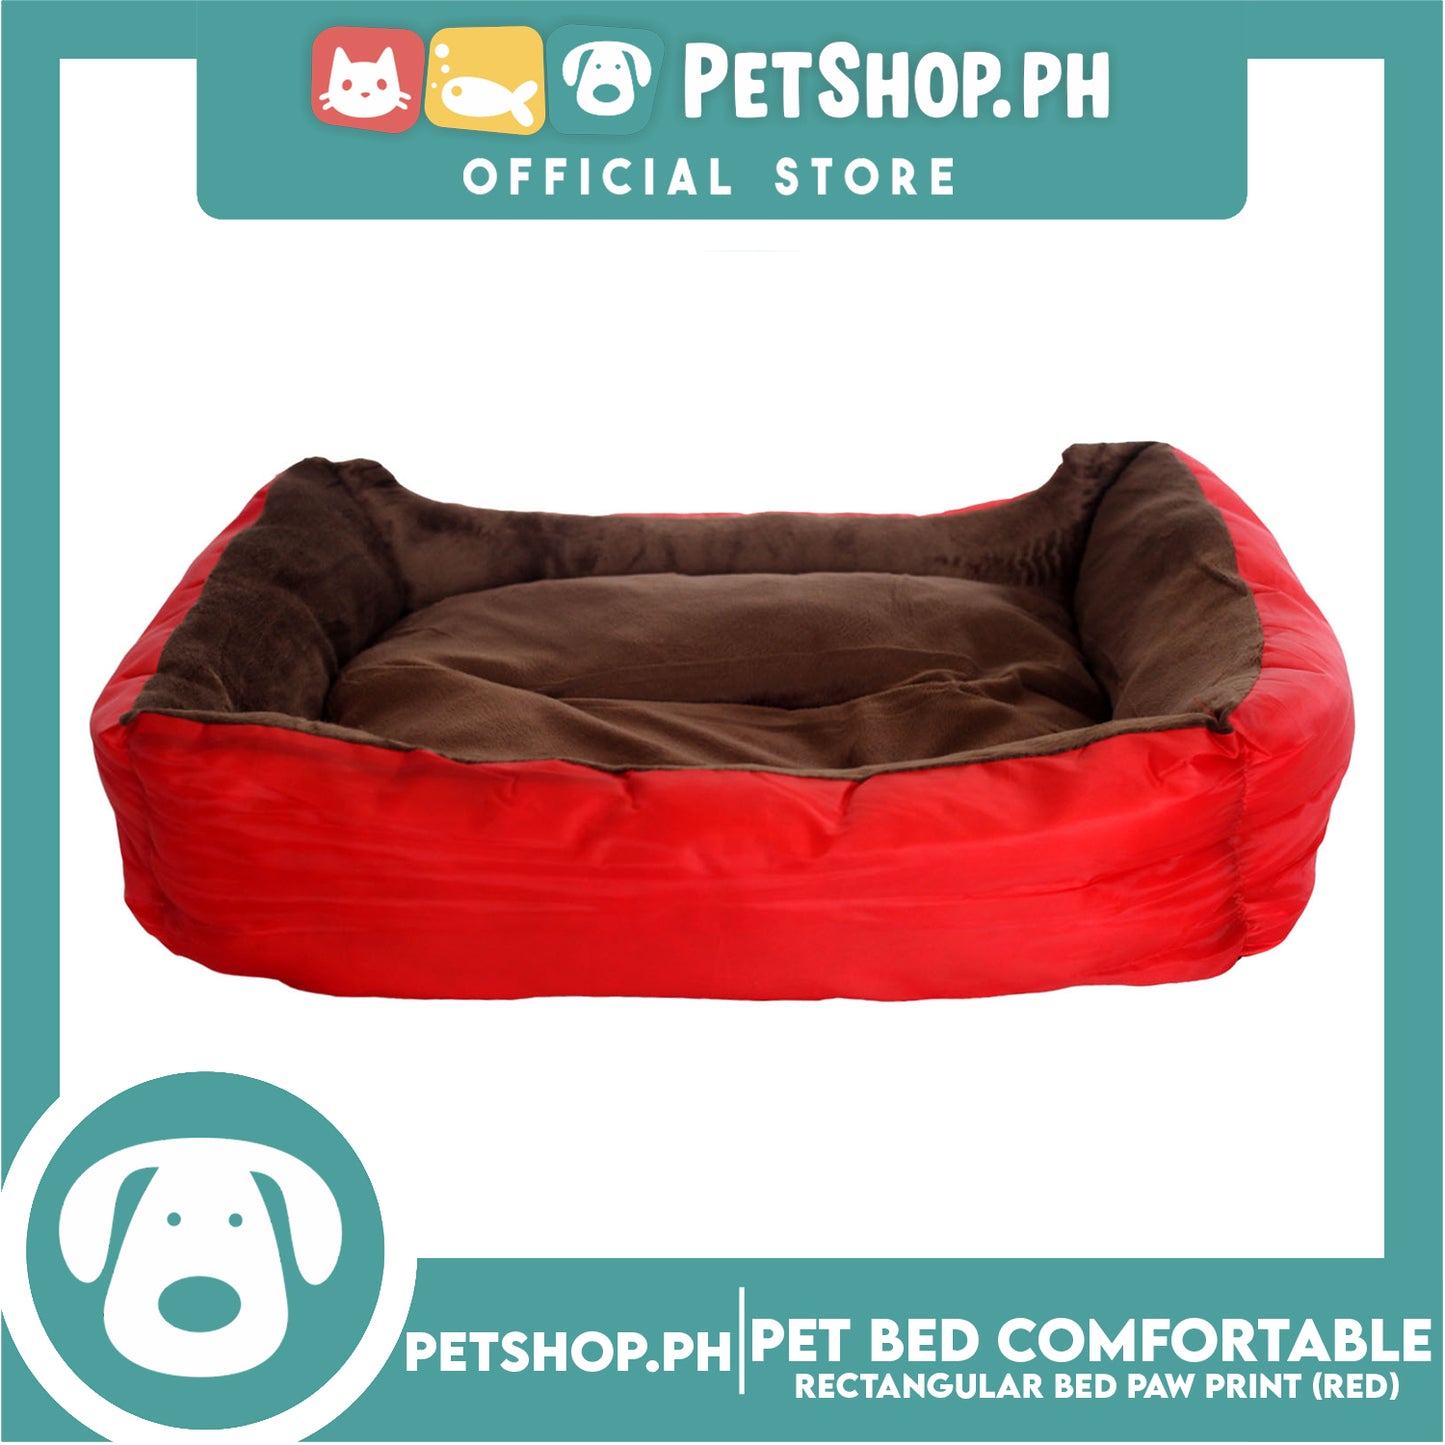 Pet Bed Comfortable Rectangular Pet Bed with Paw Print 50x40x12cm Small for Dogs & Cats (Red)